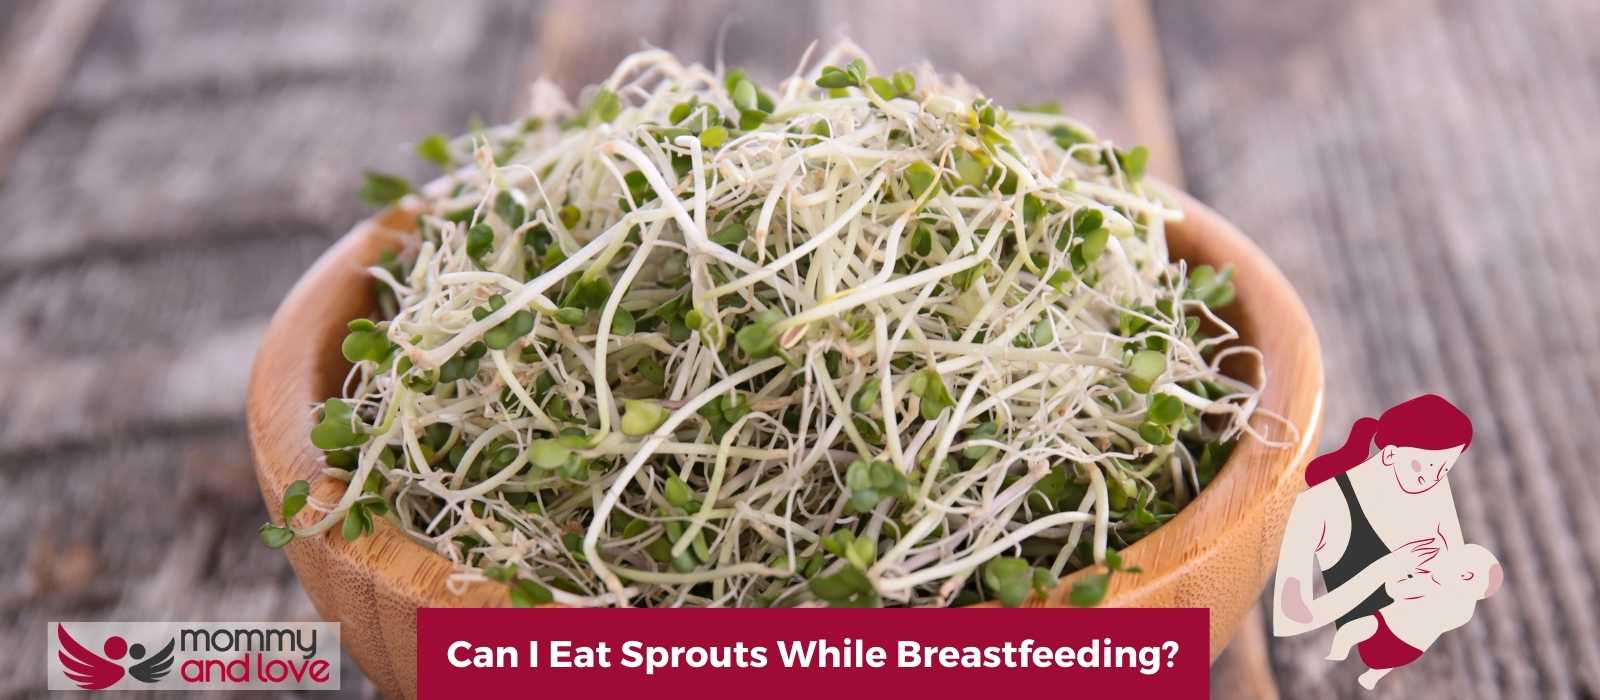 Can I Eat Sprouts While Breastfeeding